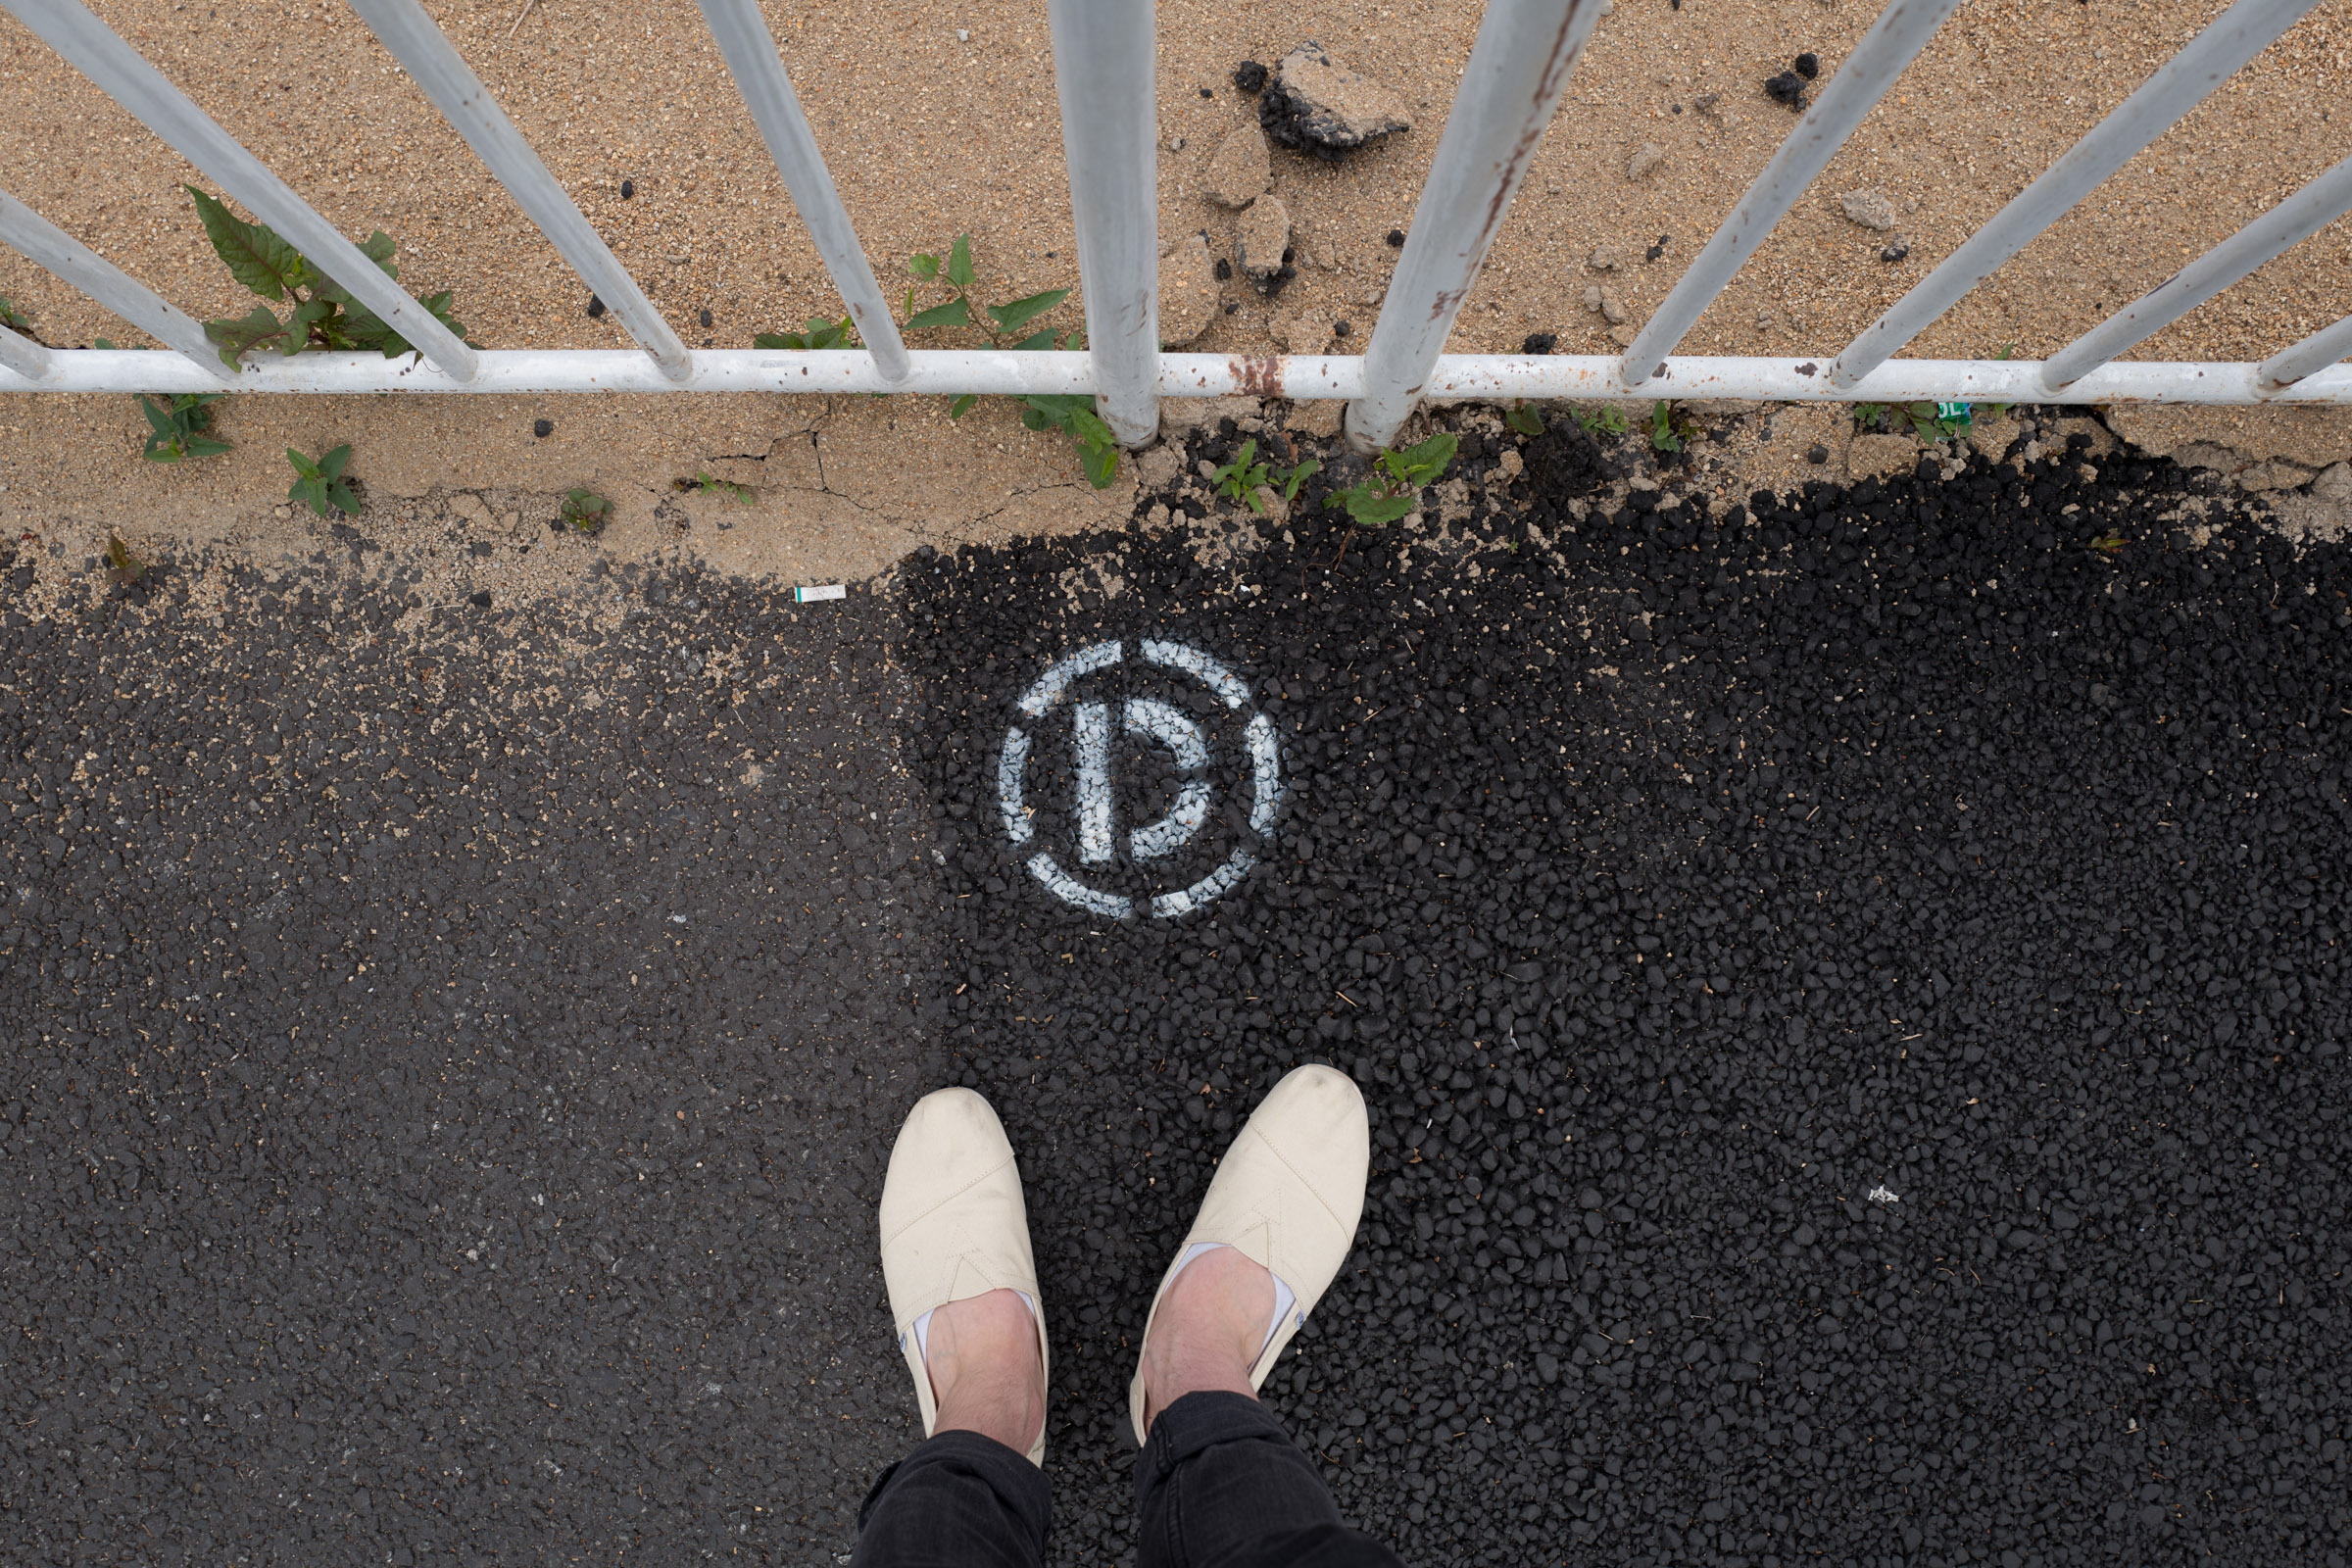 A “D” stenciled onto the streets of Tokyo